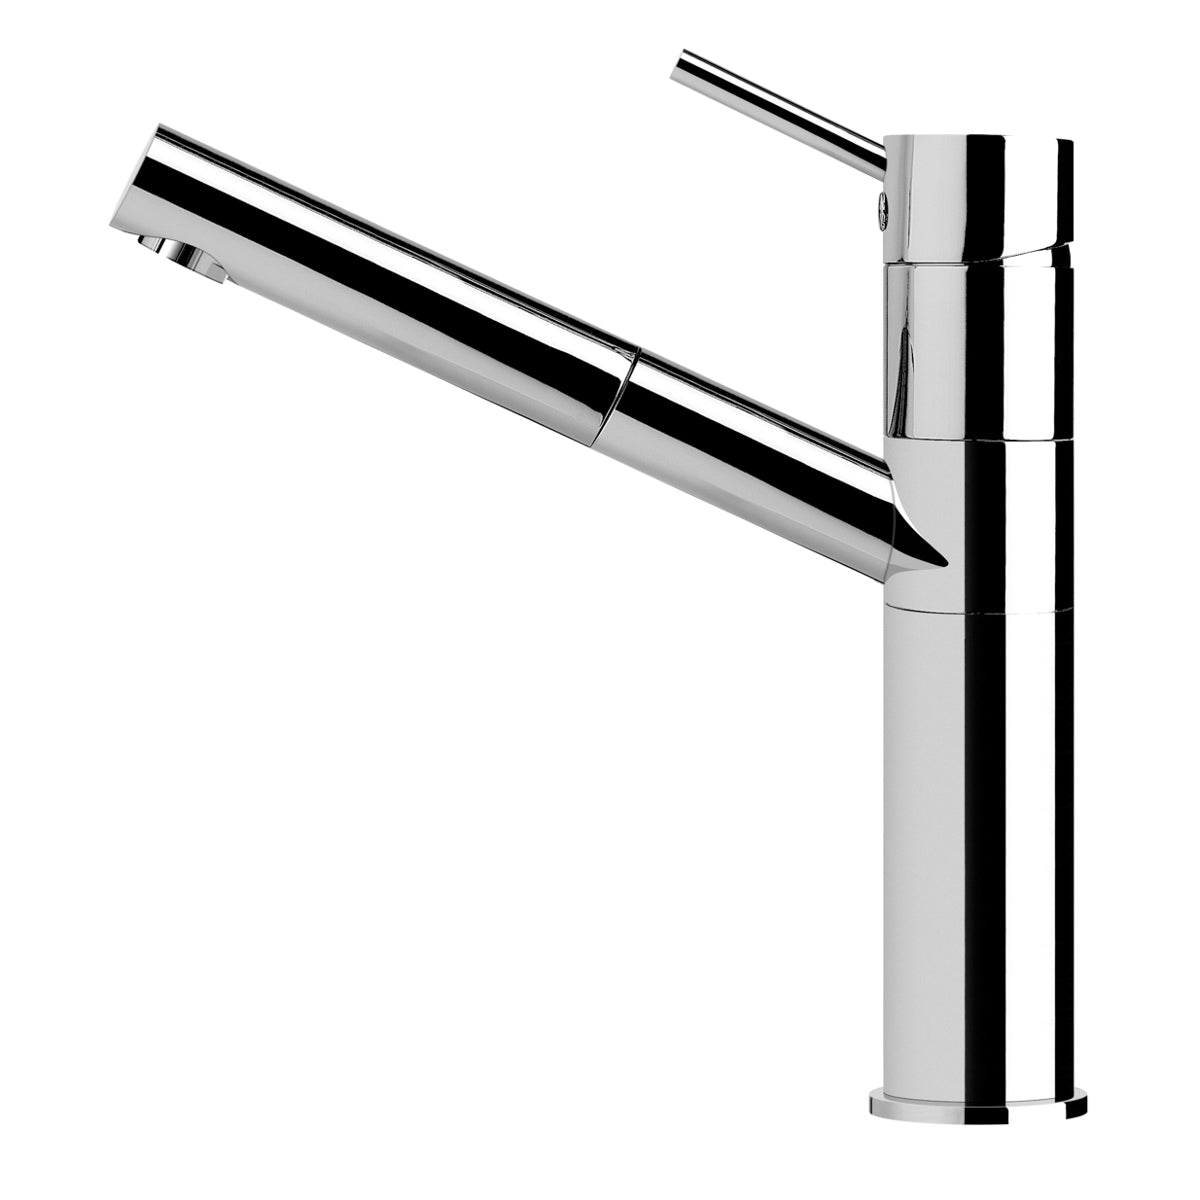 Chrome Kitchen mixer tap with swivel spout and pull out hand shower - Letta London - 